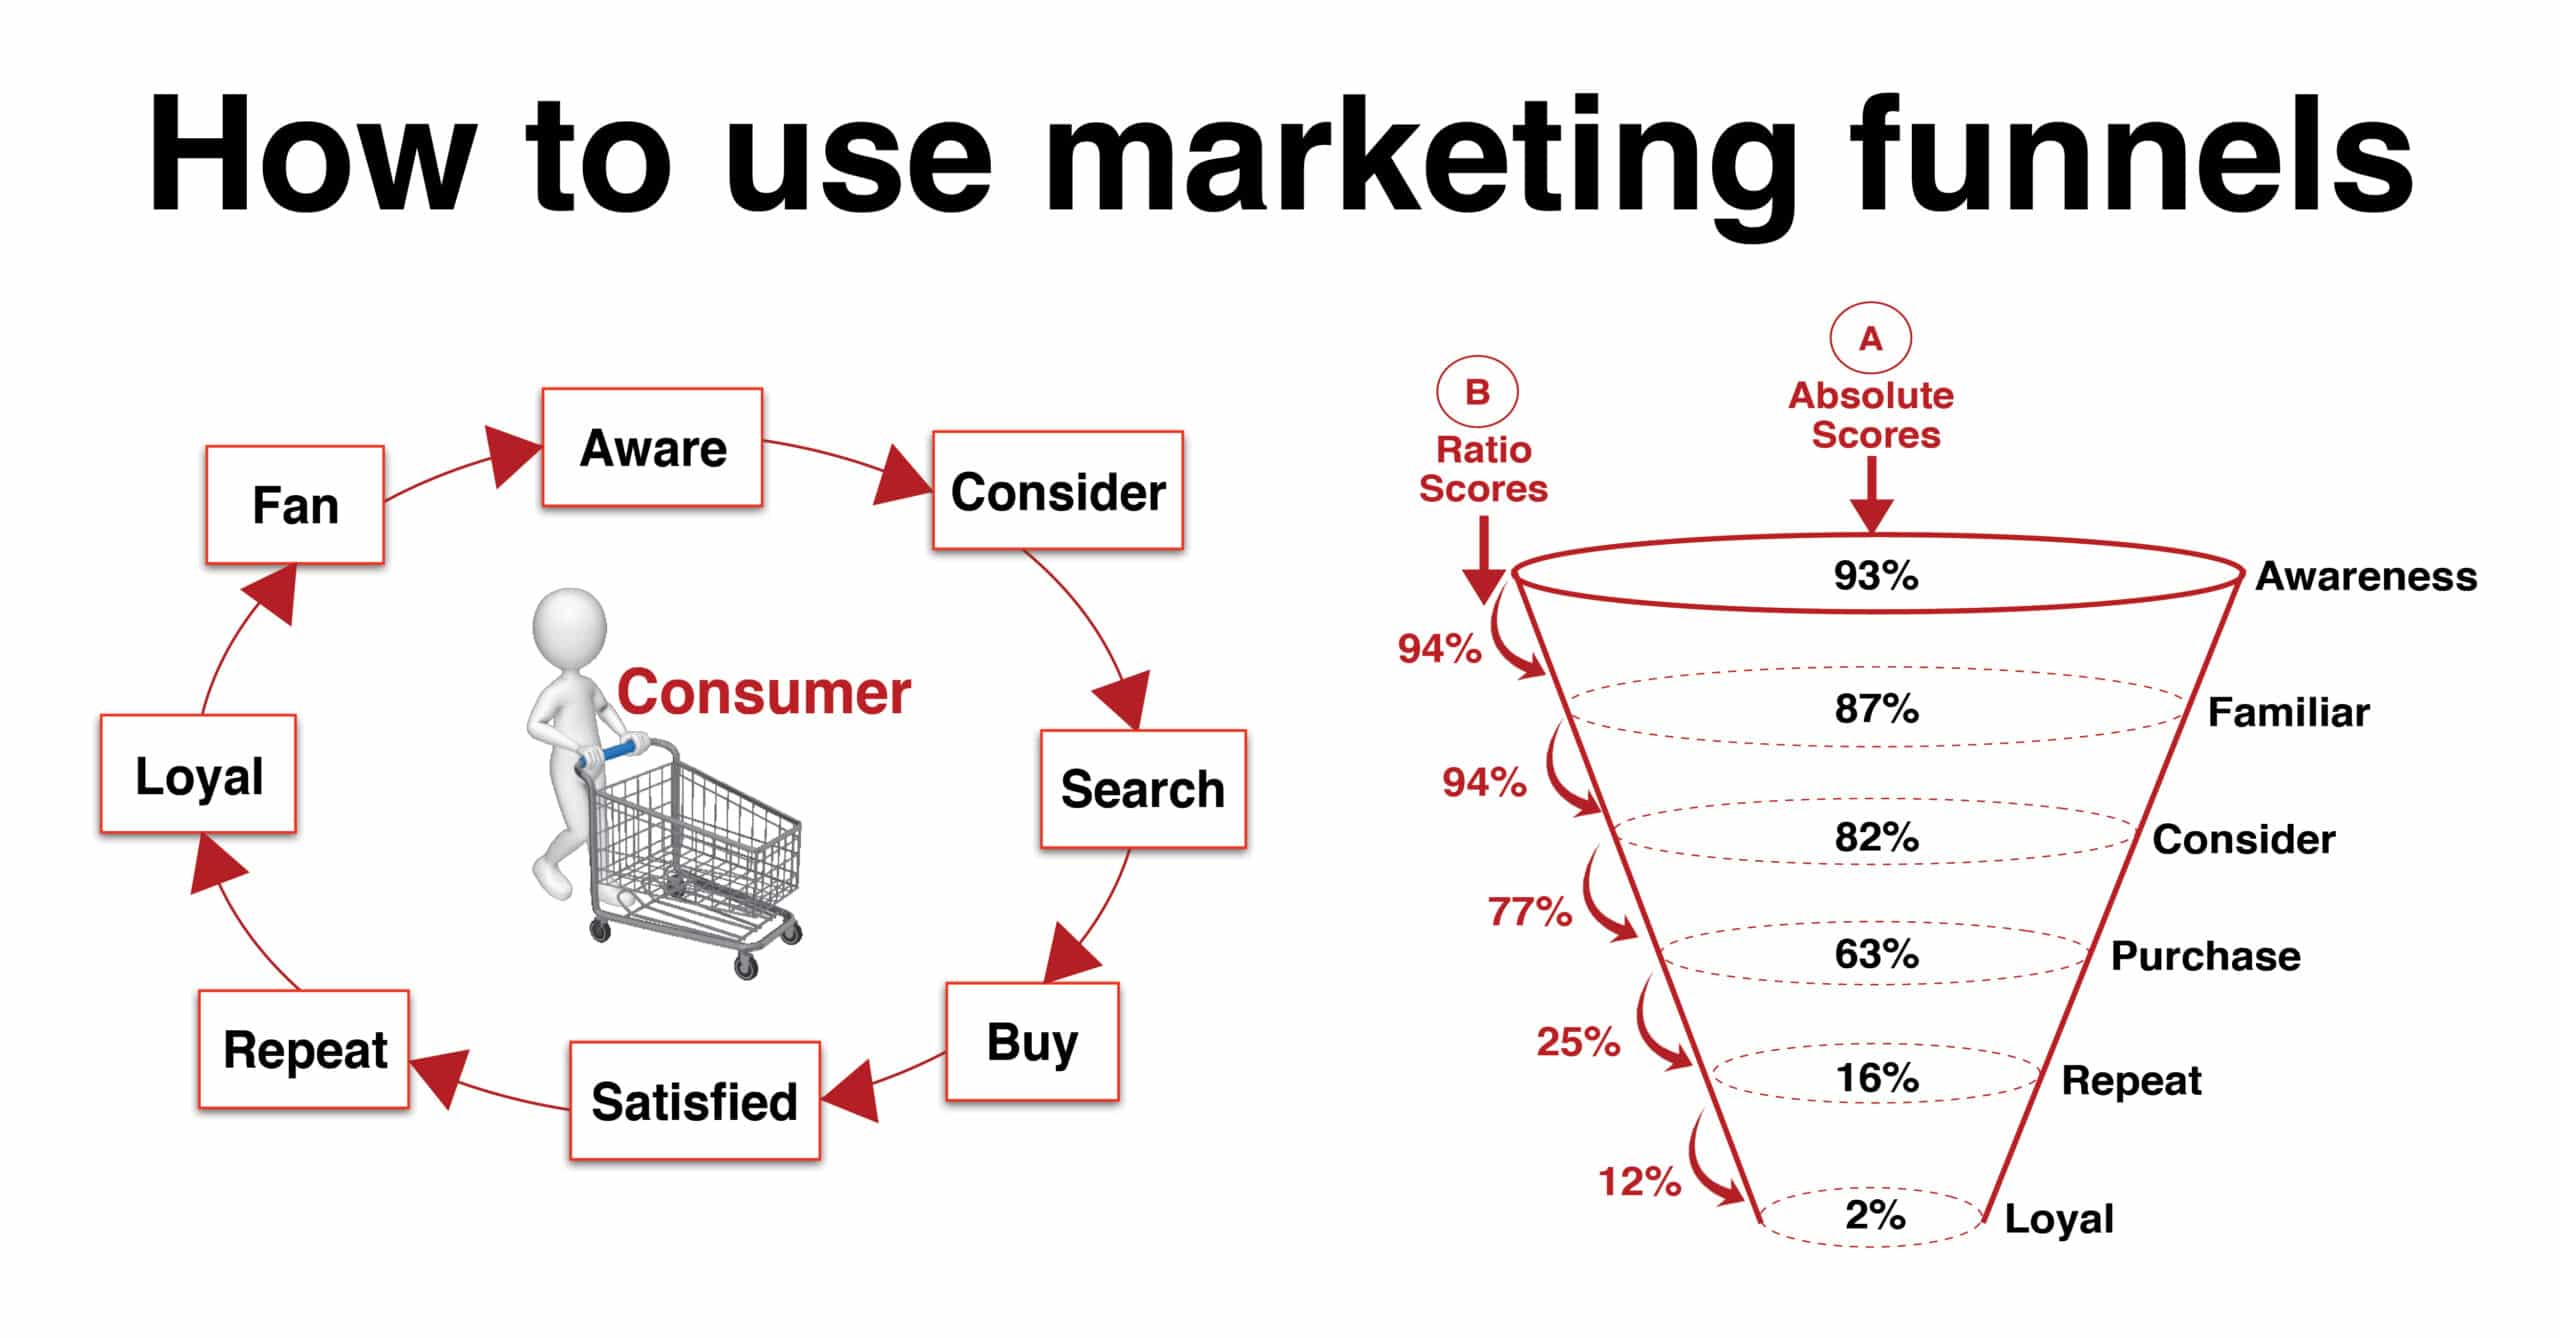 marketing funnel or sales funnel to match up to customer journey using marketing data and analytical questions